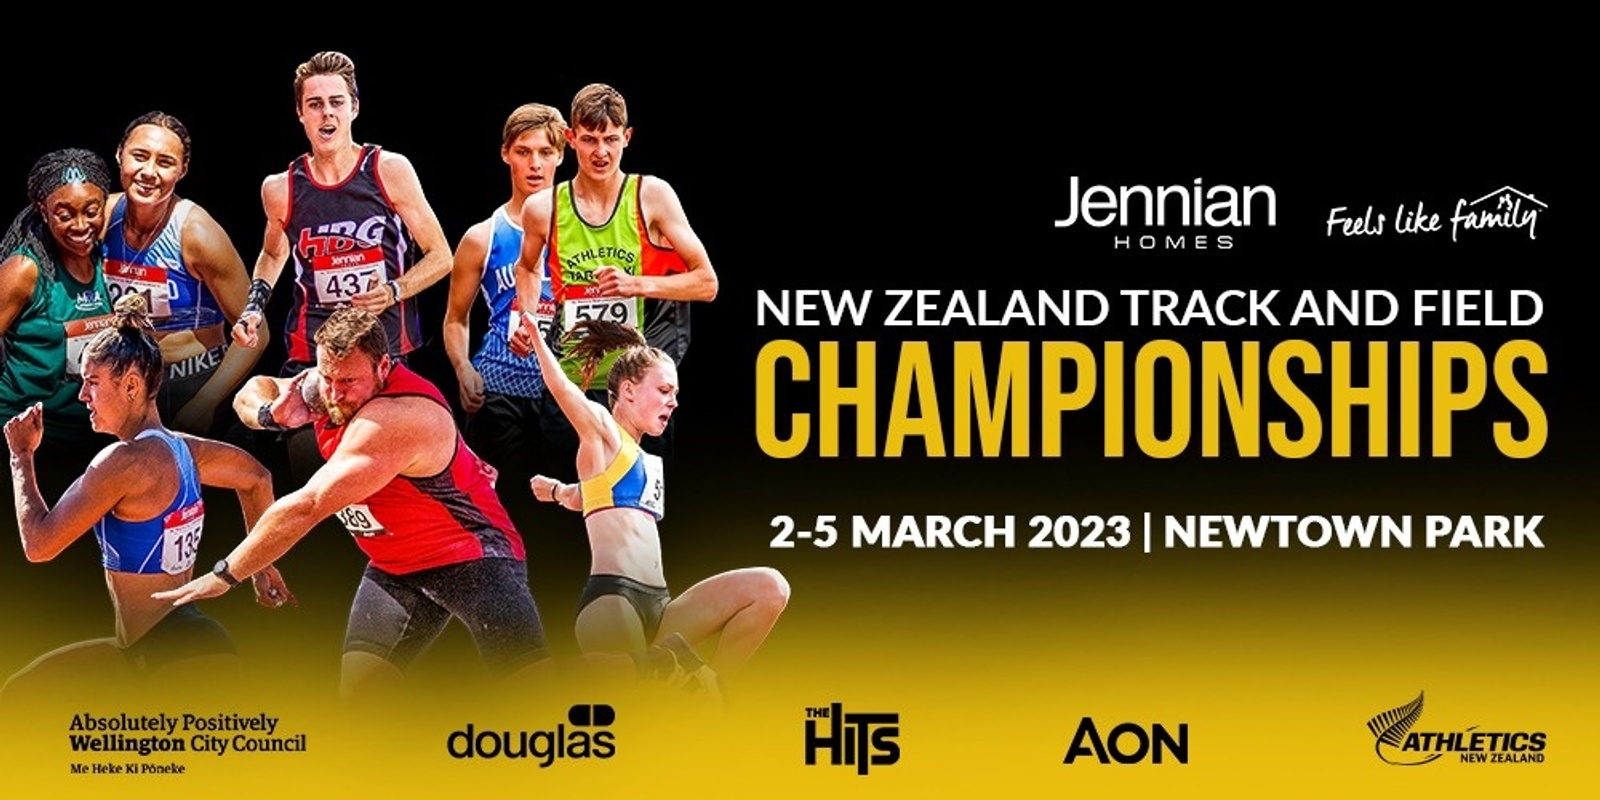 Banner image for 2023 Jennian Homes New Zealand Track and Field Championships